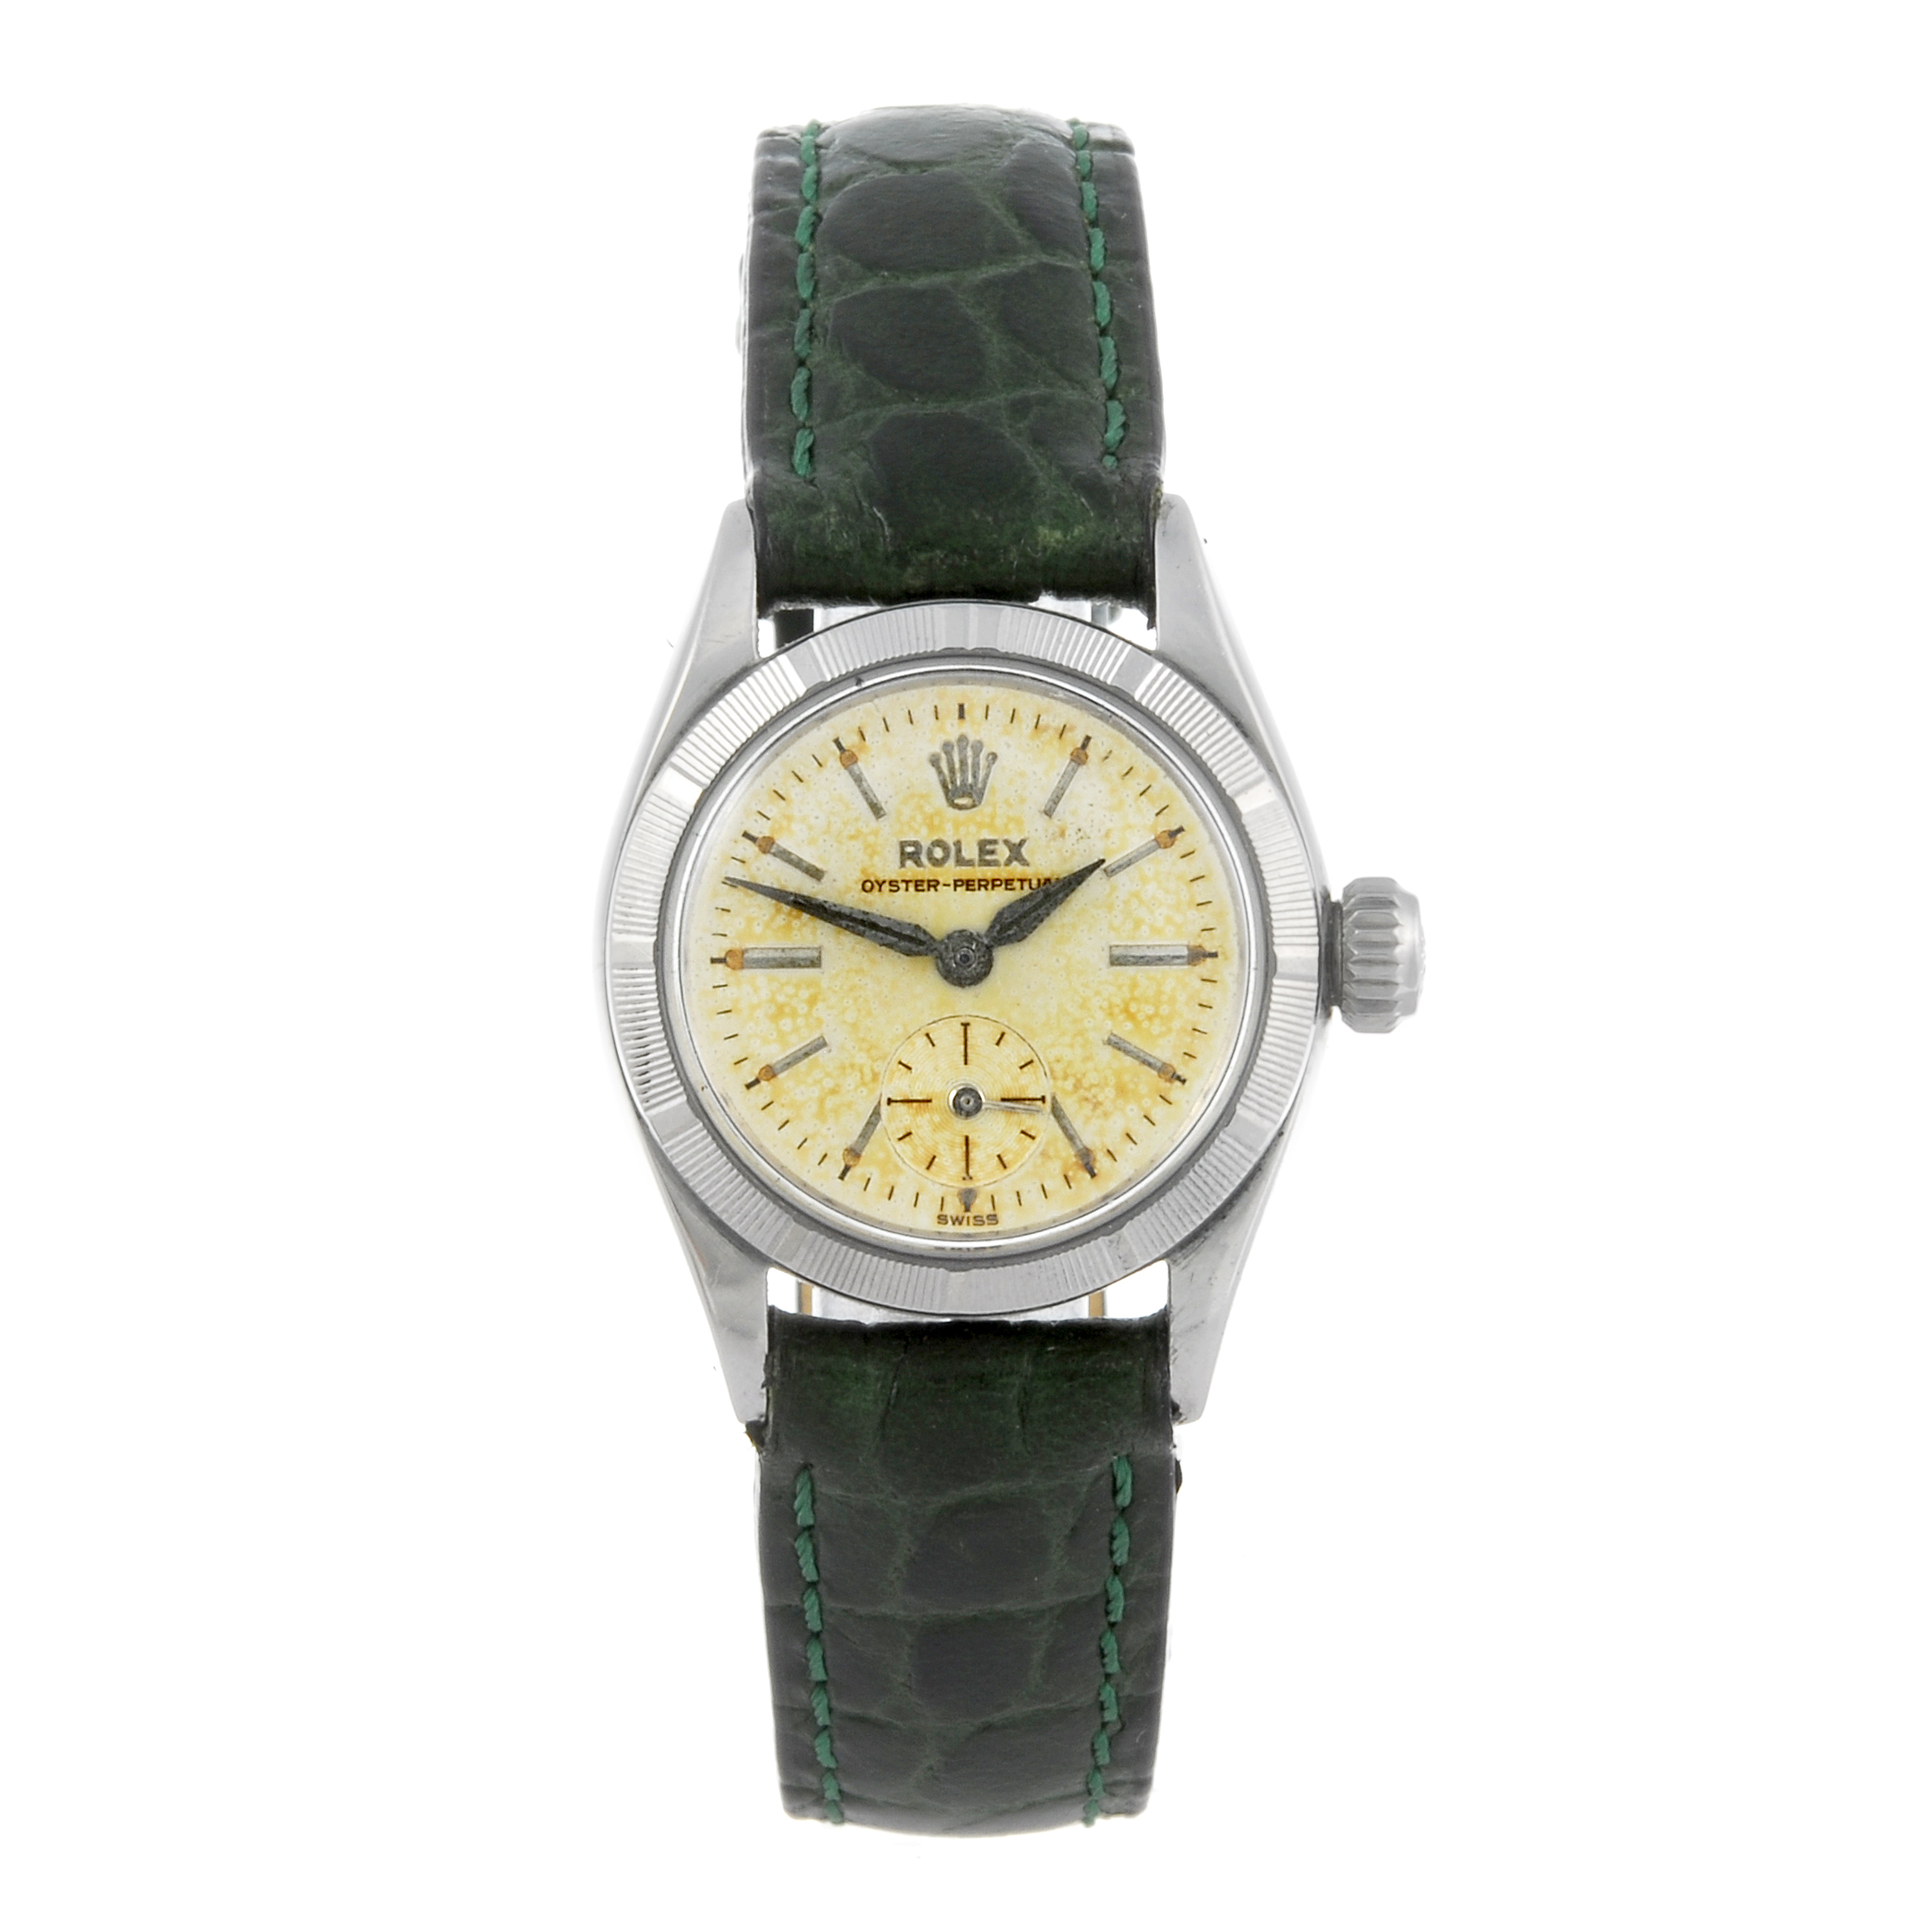 ROLEX - a lady's Oyster Perpetual wrist watch. Circa 1957. Stainless steel case with engine turned